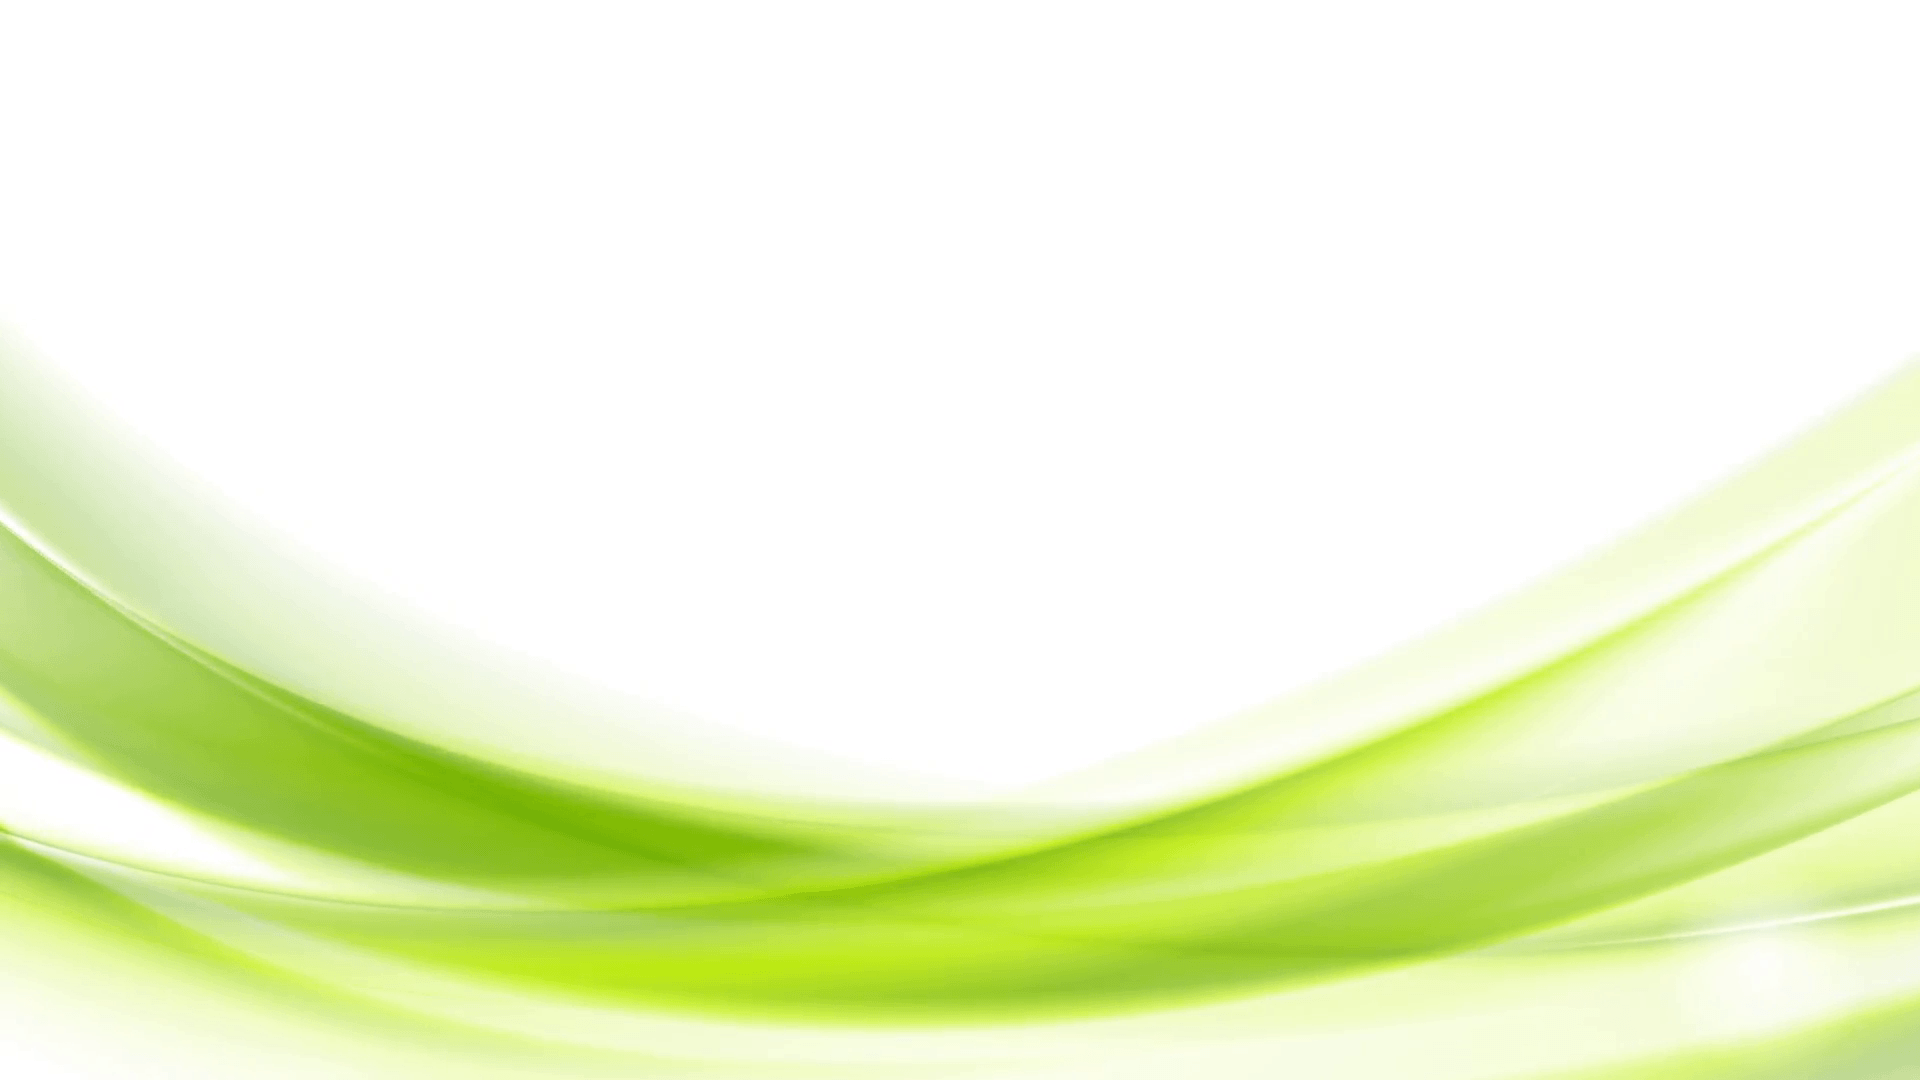 Green moving flowing abstract waves on white background. Blurred